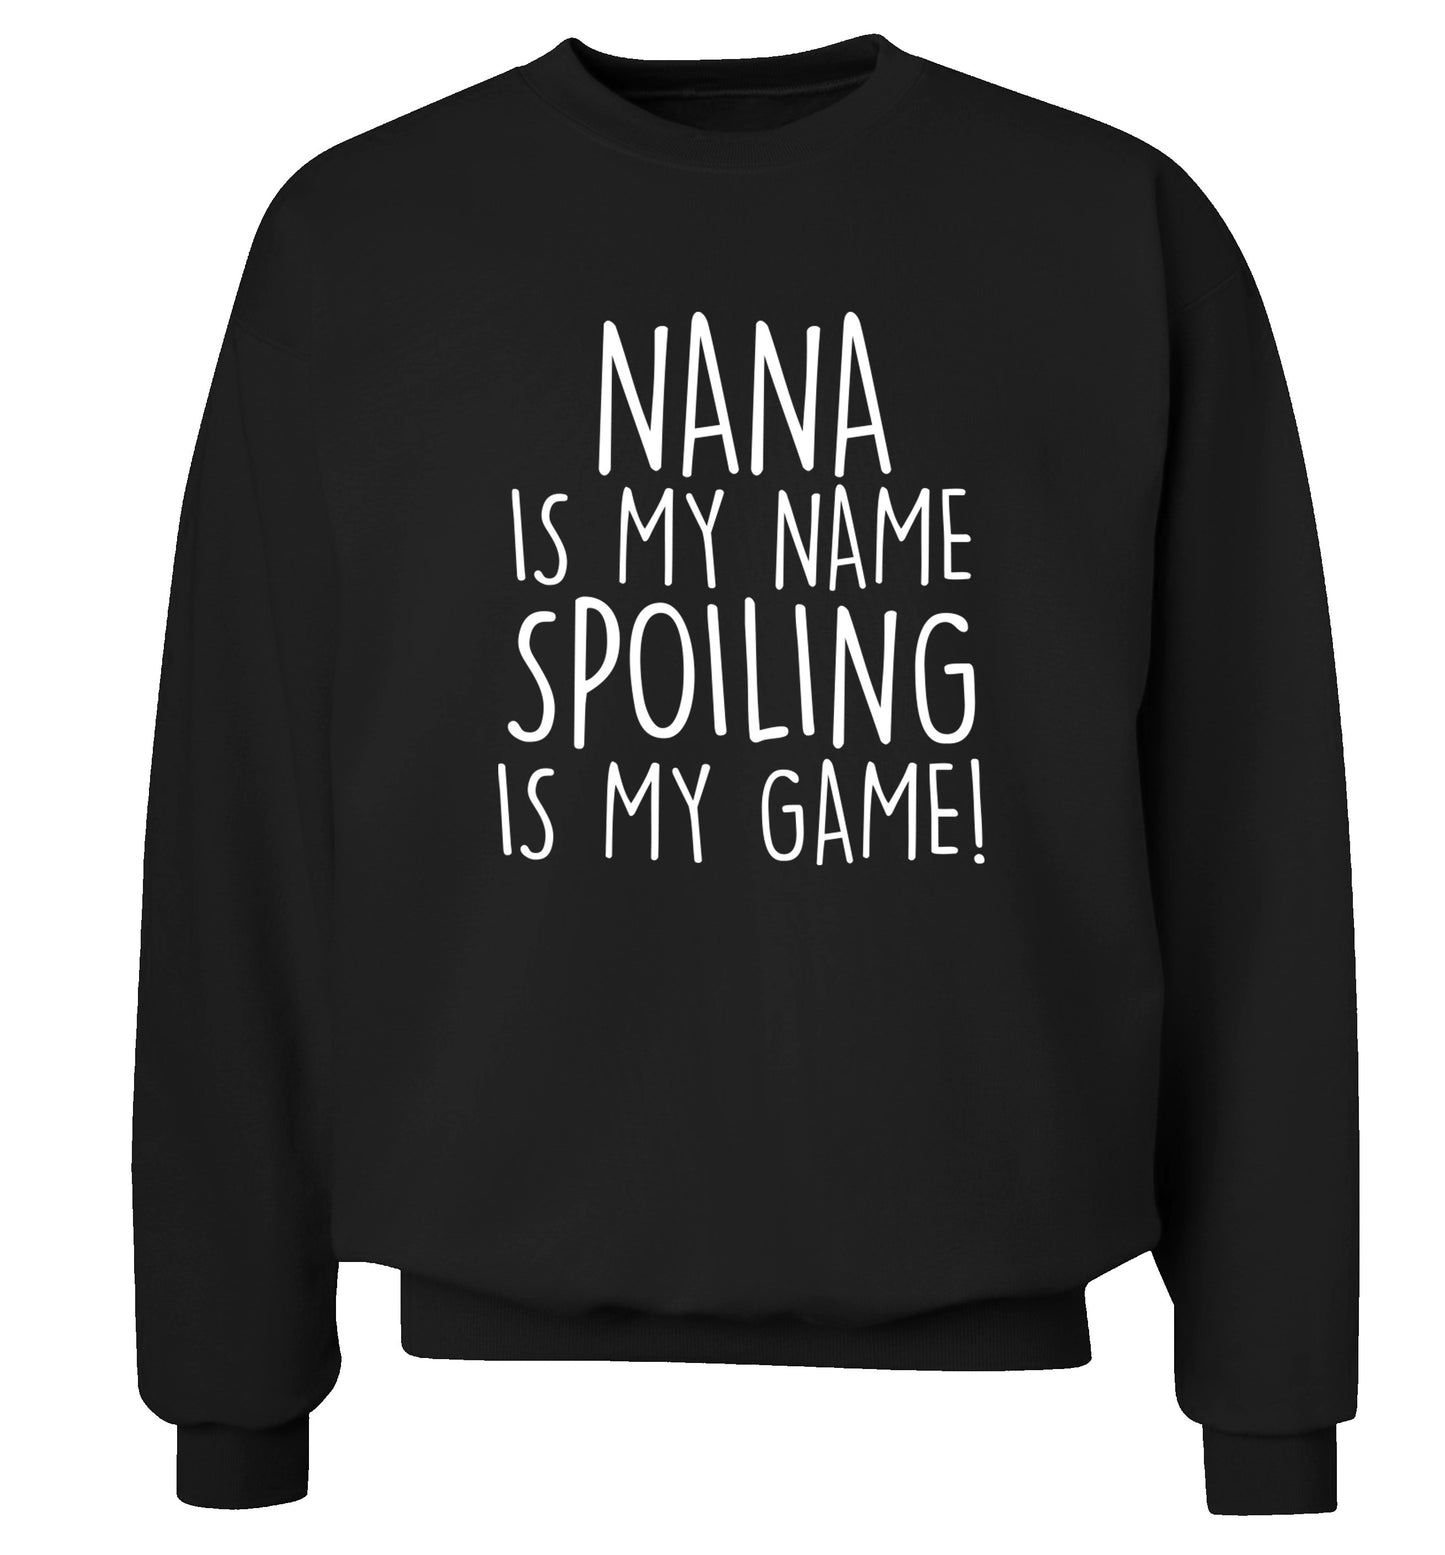 Nana is my name, spoiling is my game Adult's unisex black Sweater 2XL